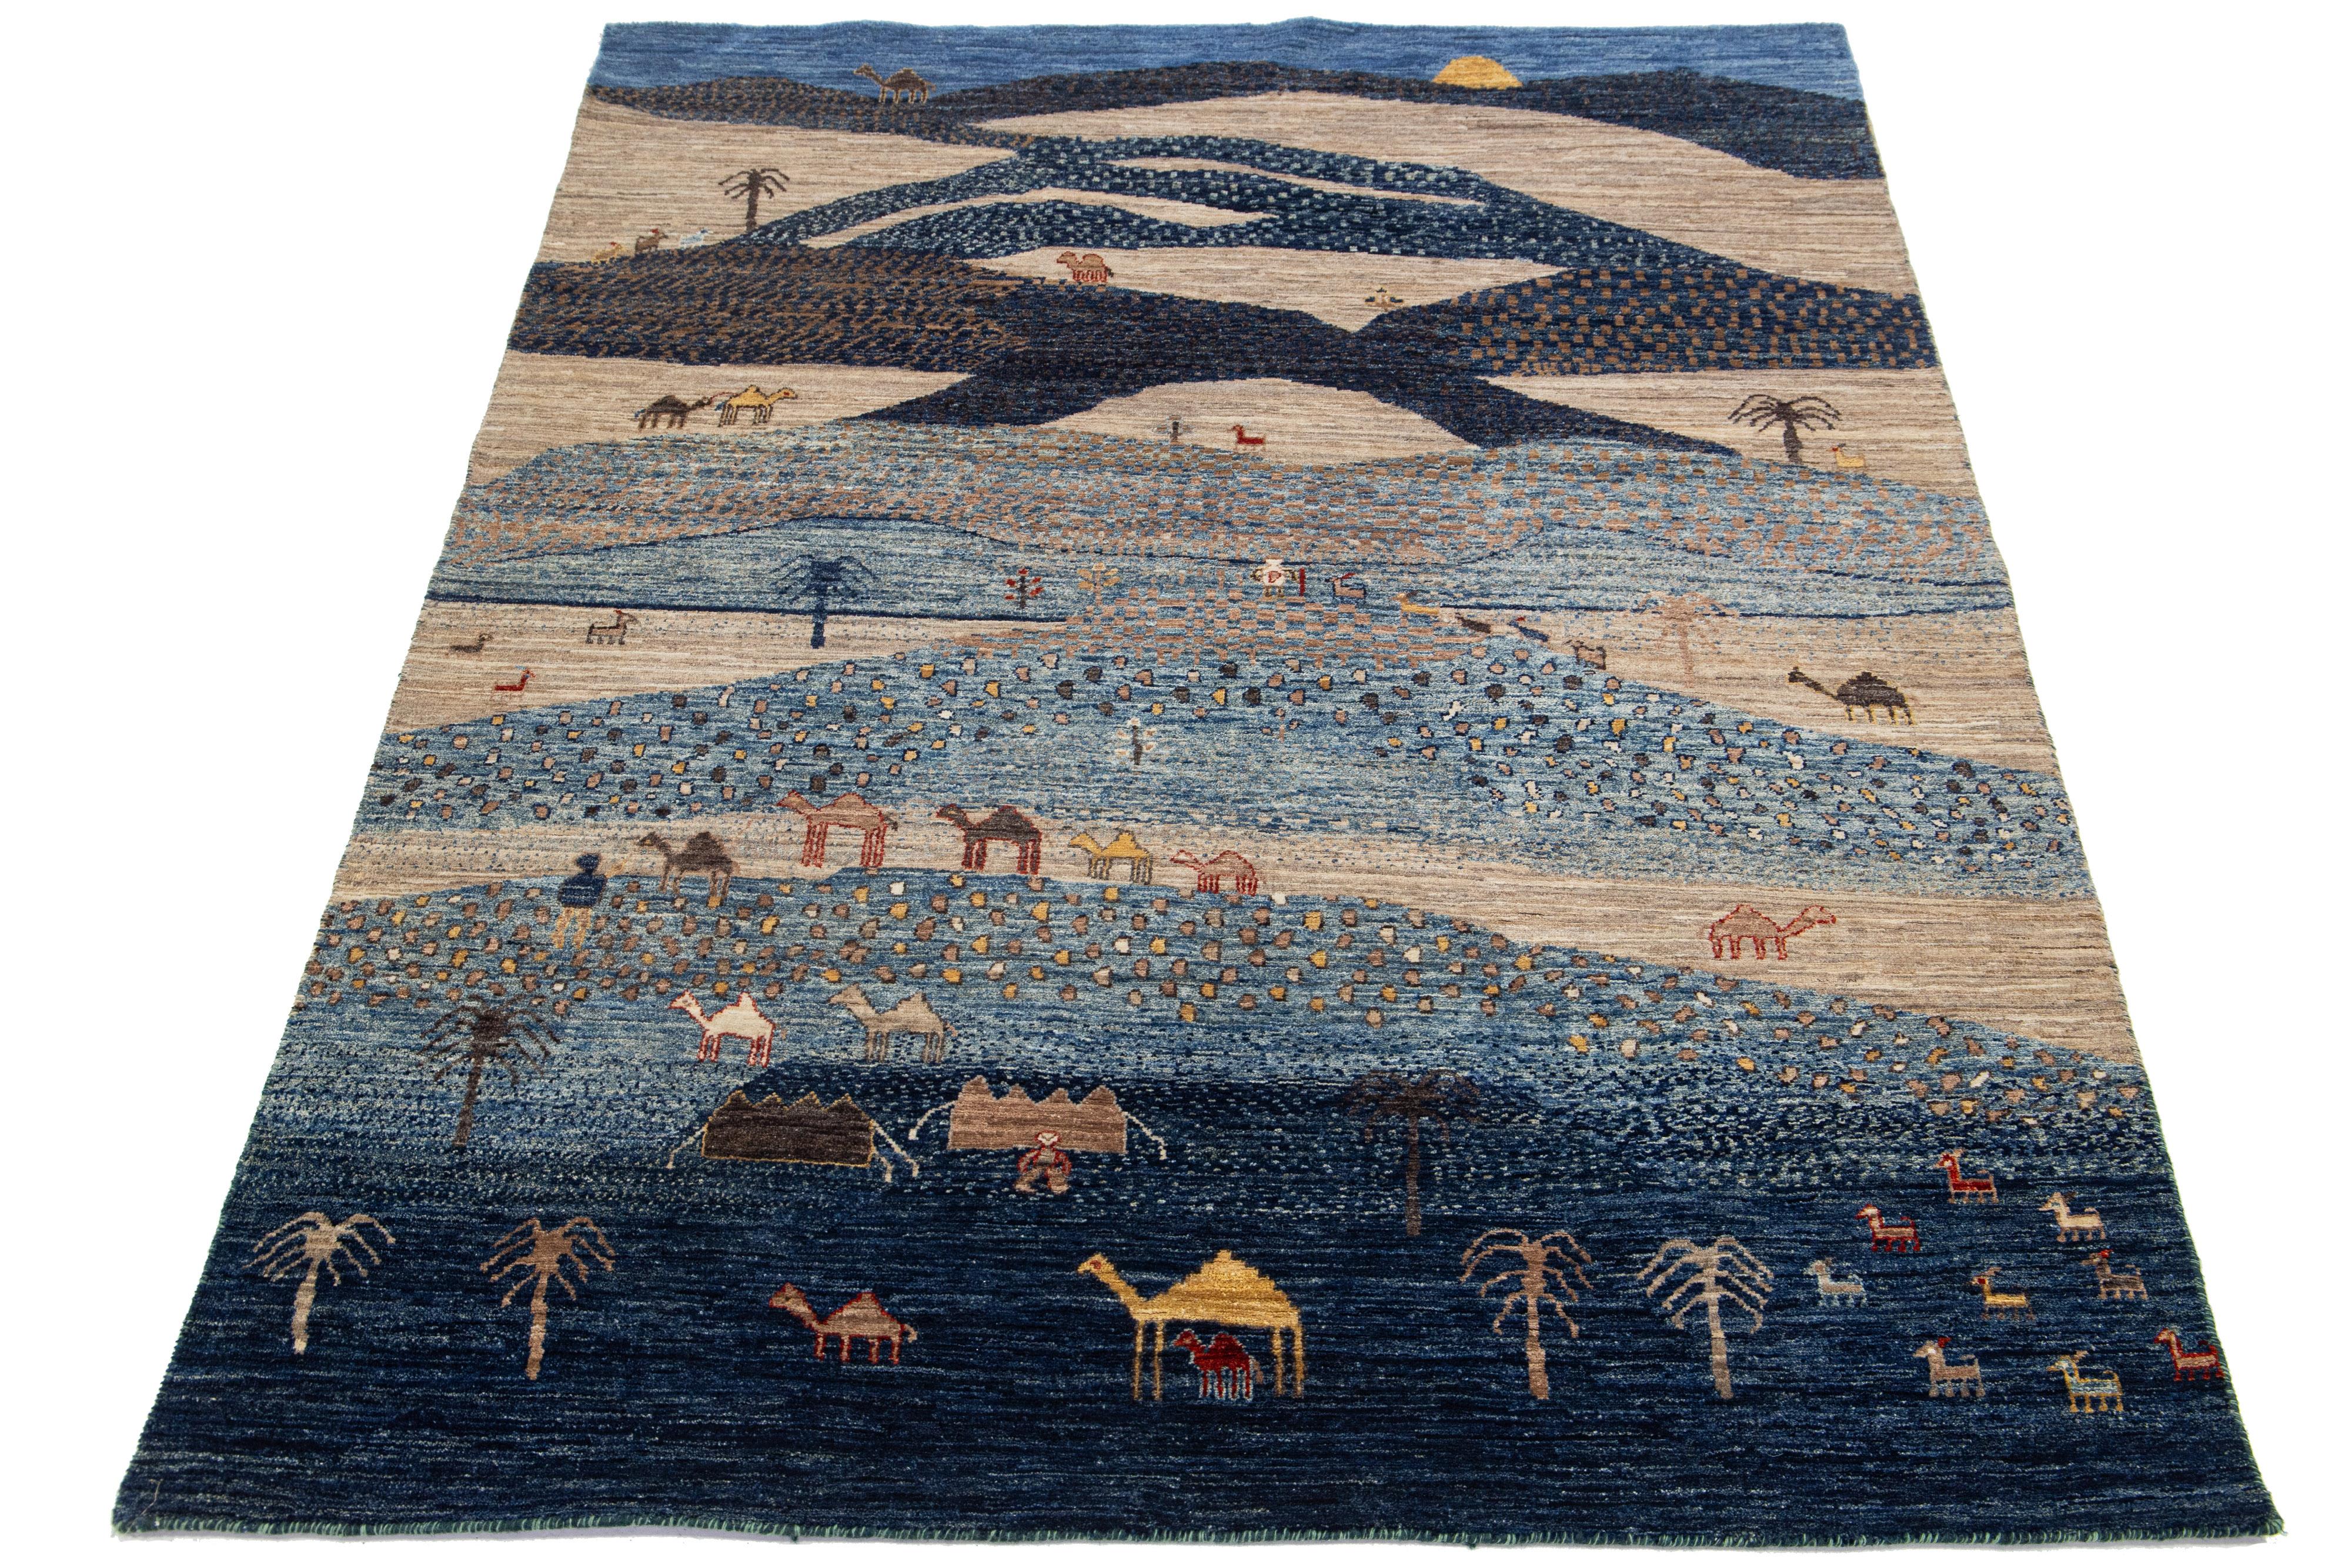 This handcrafted wool and silk rug, designed in the Gabbeh style, showcases a pictorial design accentuated by different shades against a vibrant blue background.

This rug measures 4'10